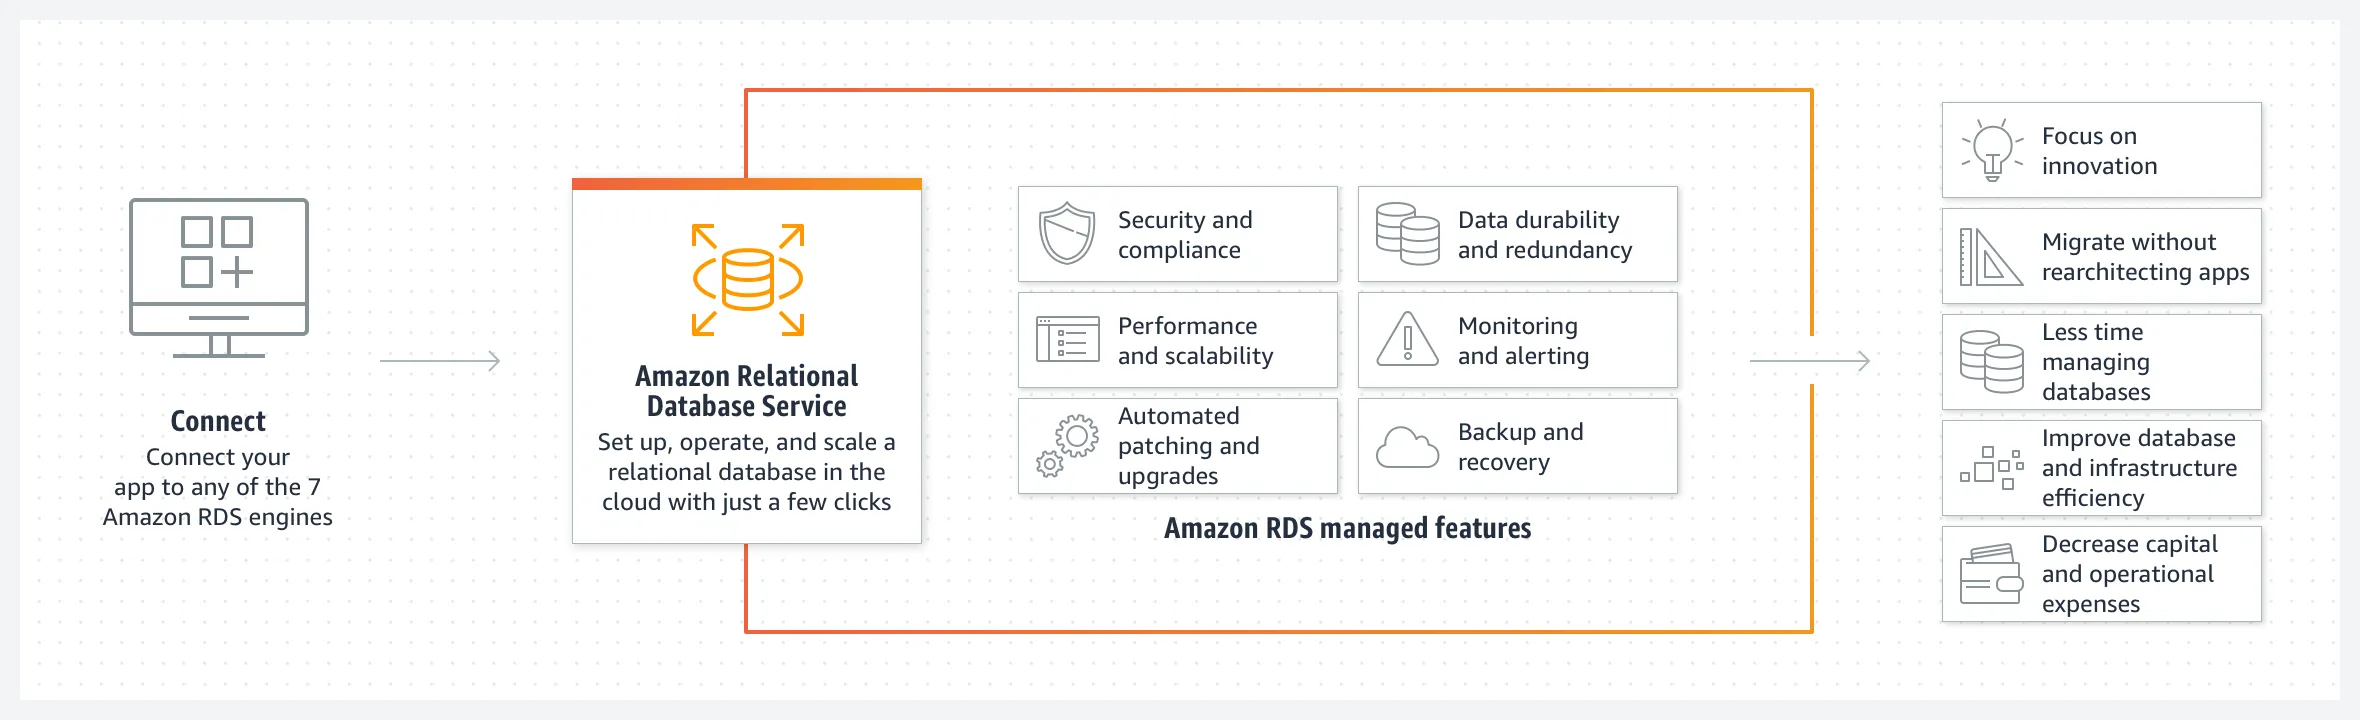 Protect Your Data in Amazon RDS Against Disaster or Accidental Deletion